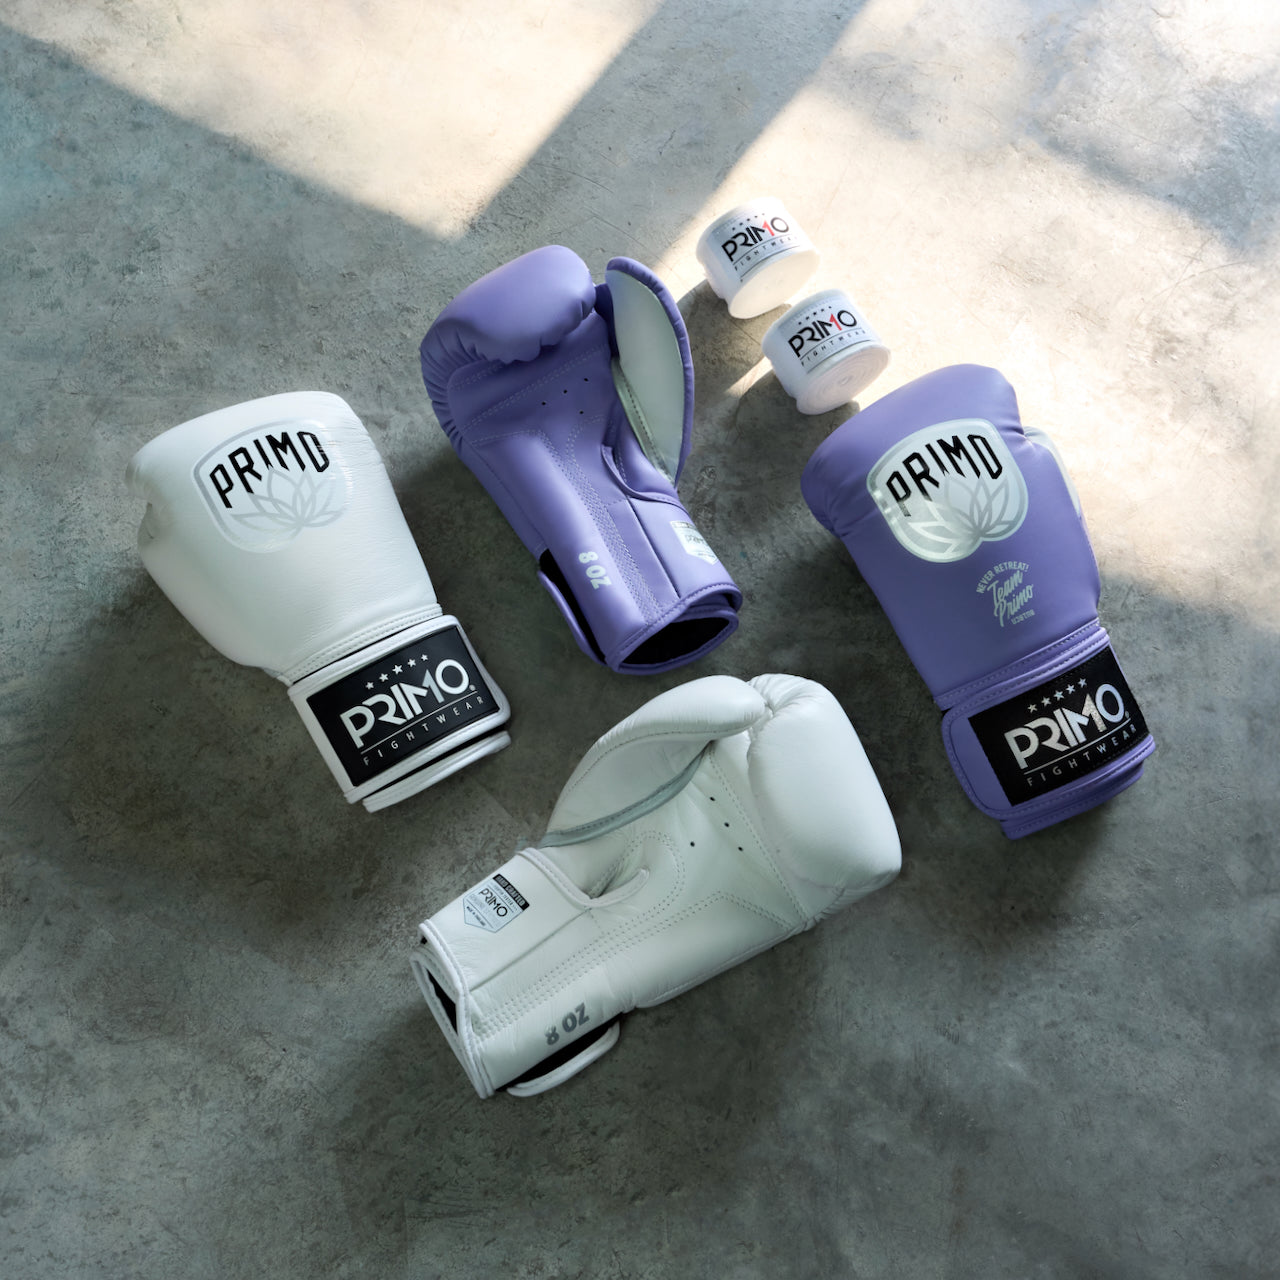 CHOOSING THE PERFECT PAIR OF BOXING GLOVES